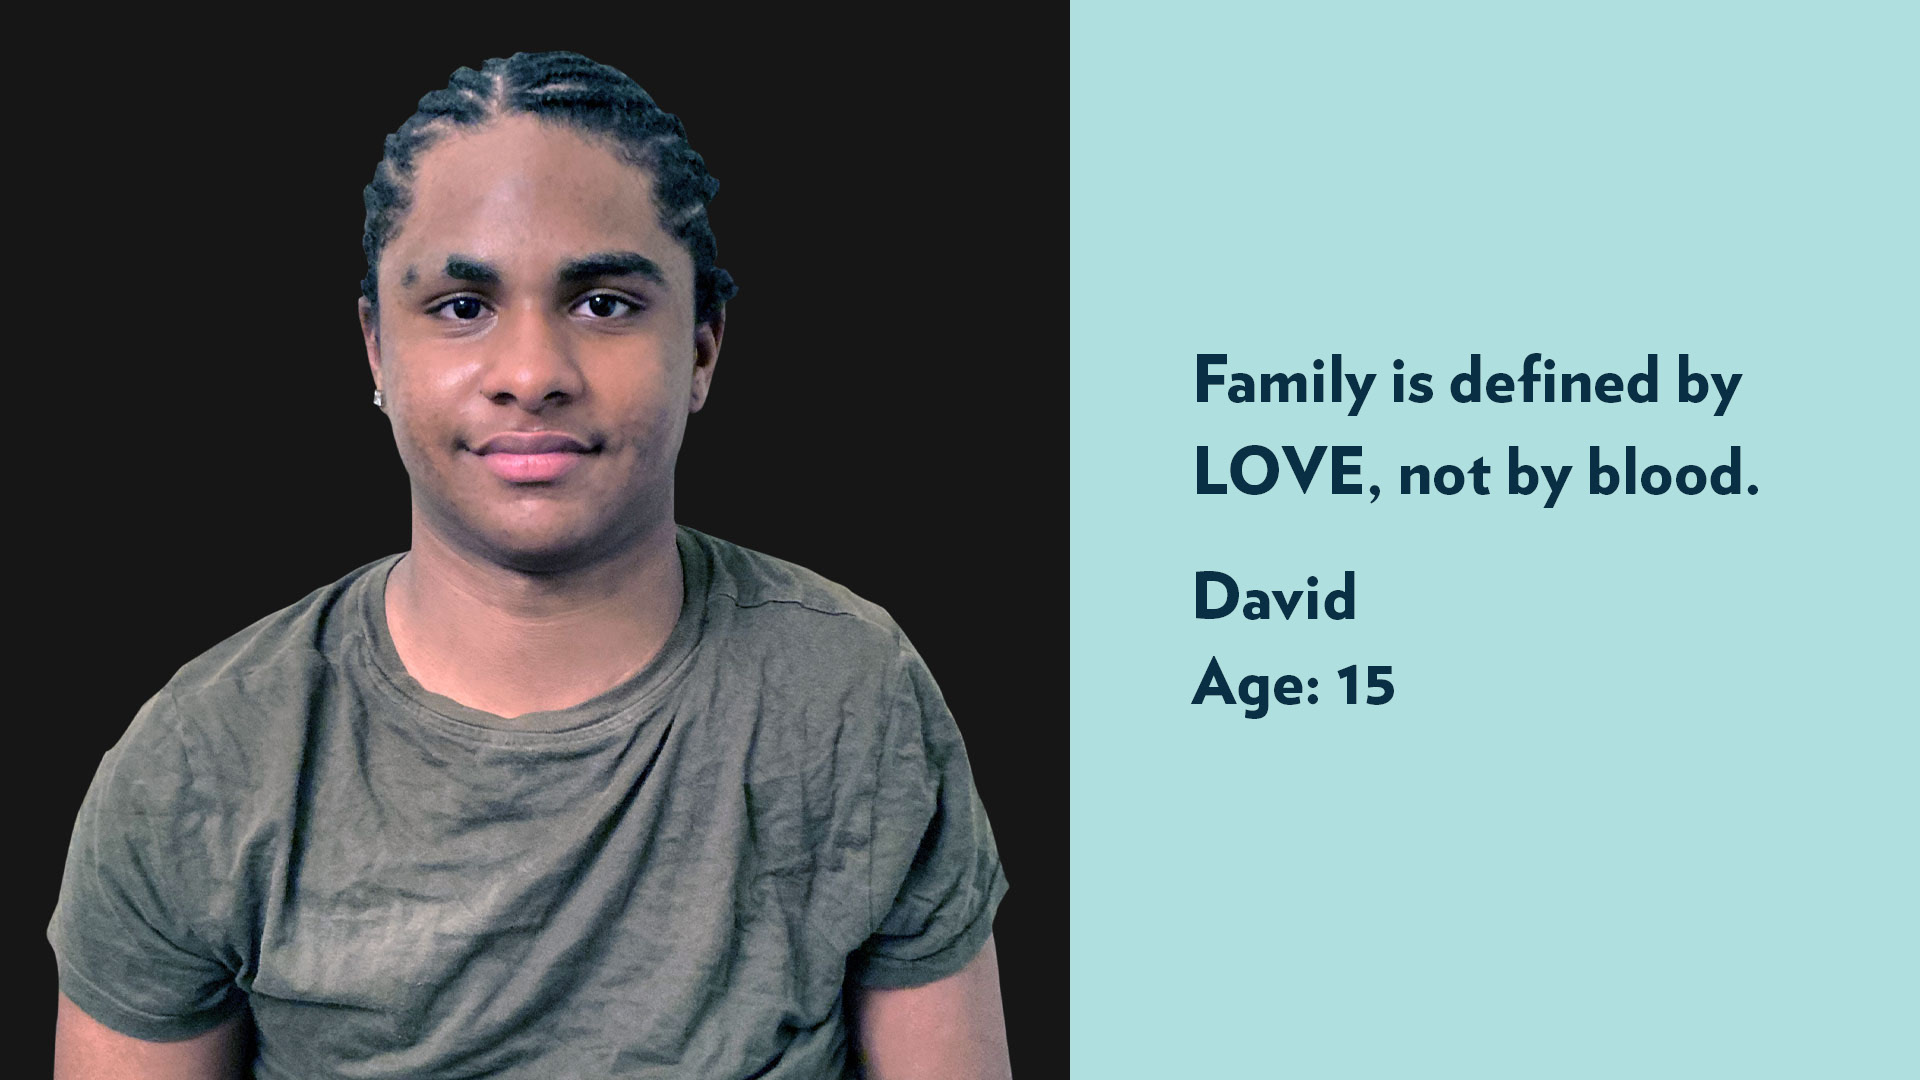 David, age 15. Family is defined by love, not by blood.